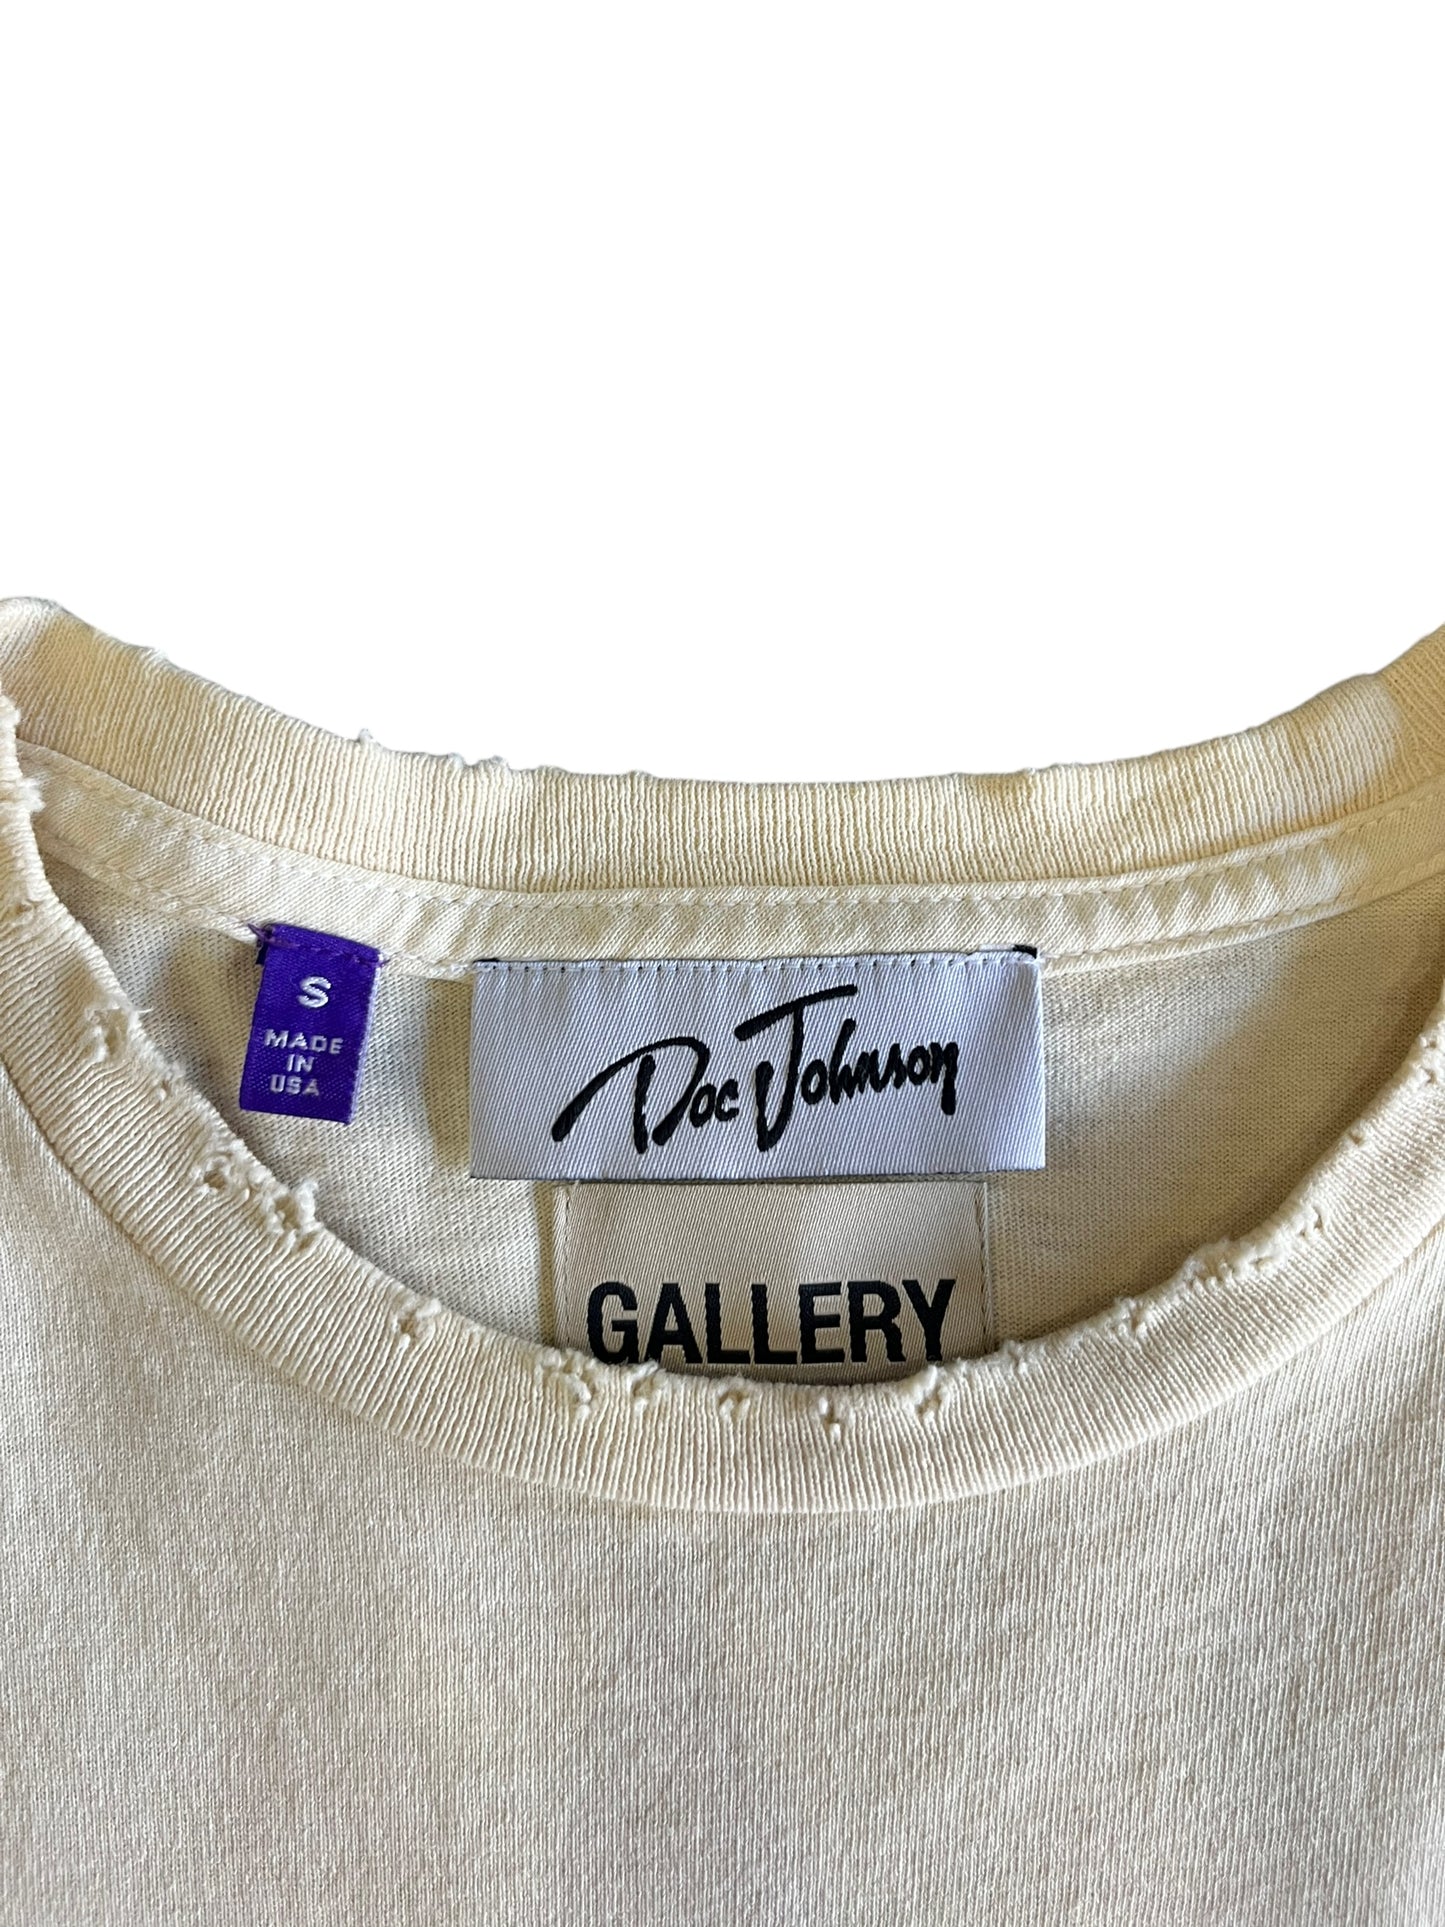 Gallery Dept Toymaker Tee Used Size S